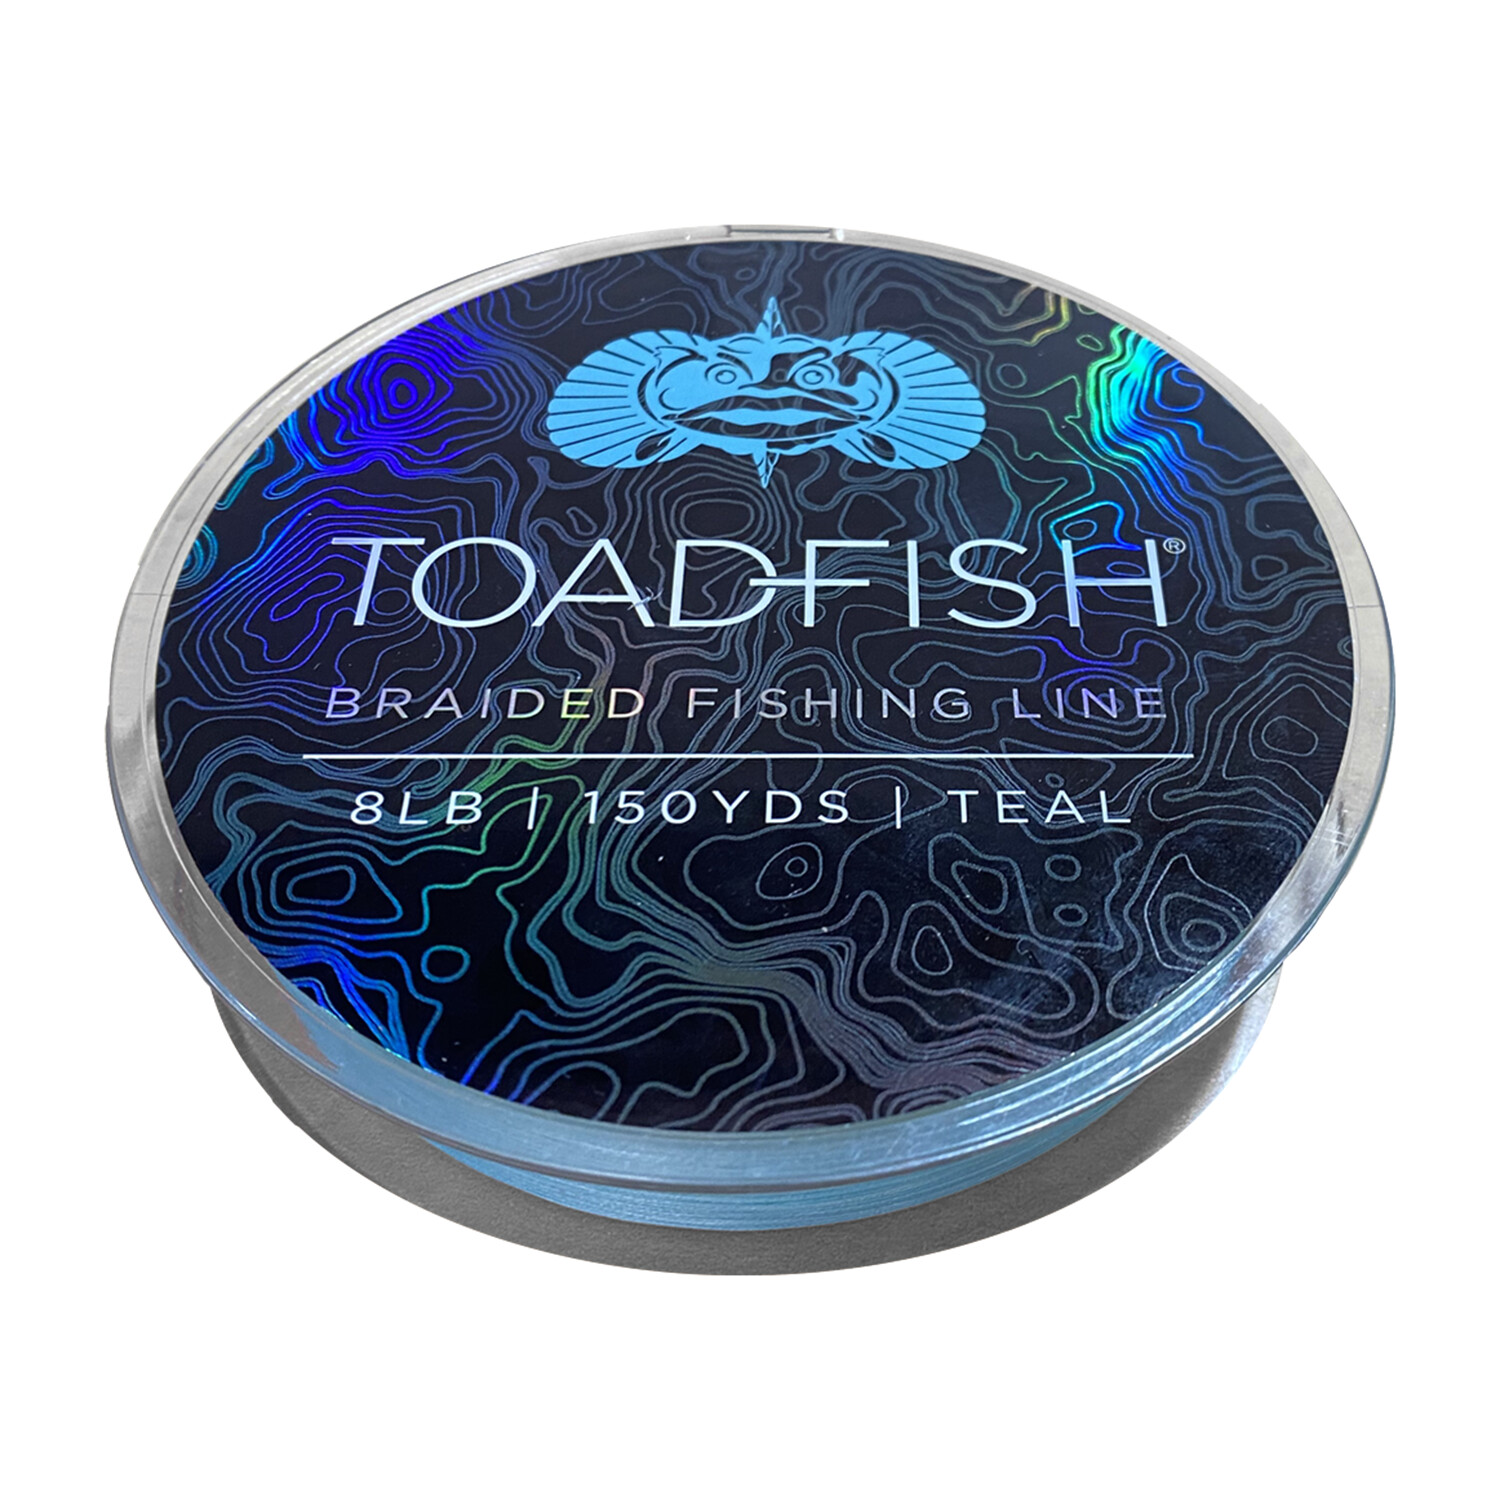 Toadfish Braided Line // 8LB 150 Yards // Teal - Toadfish Outfitters - Touch  of Modern